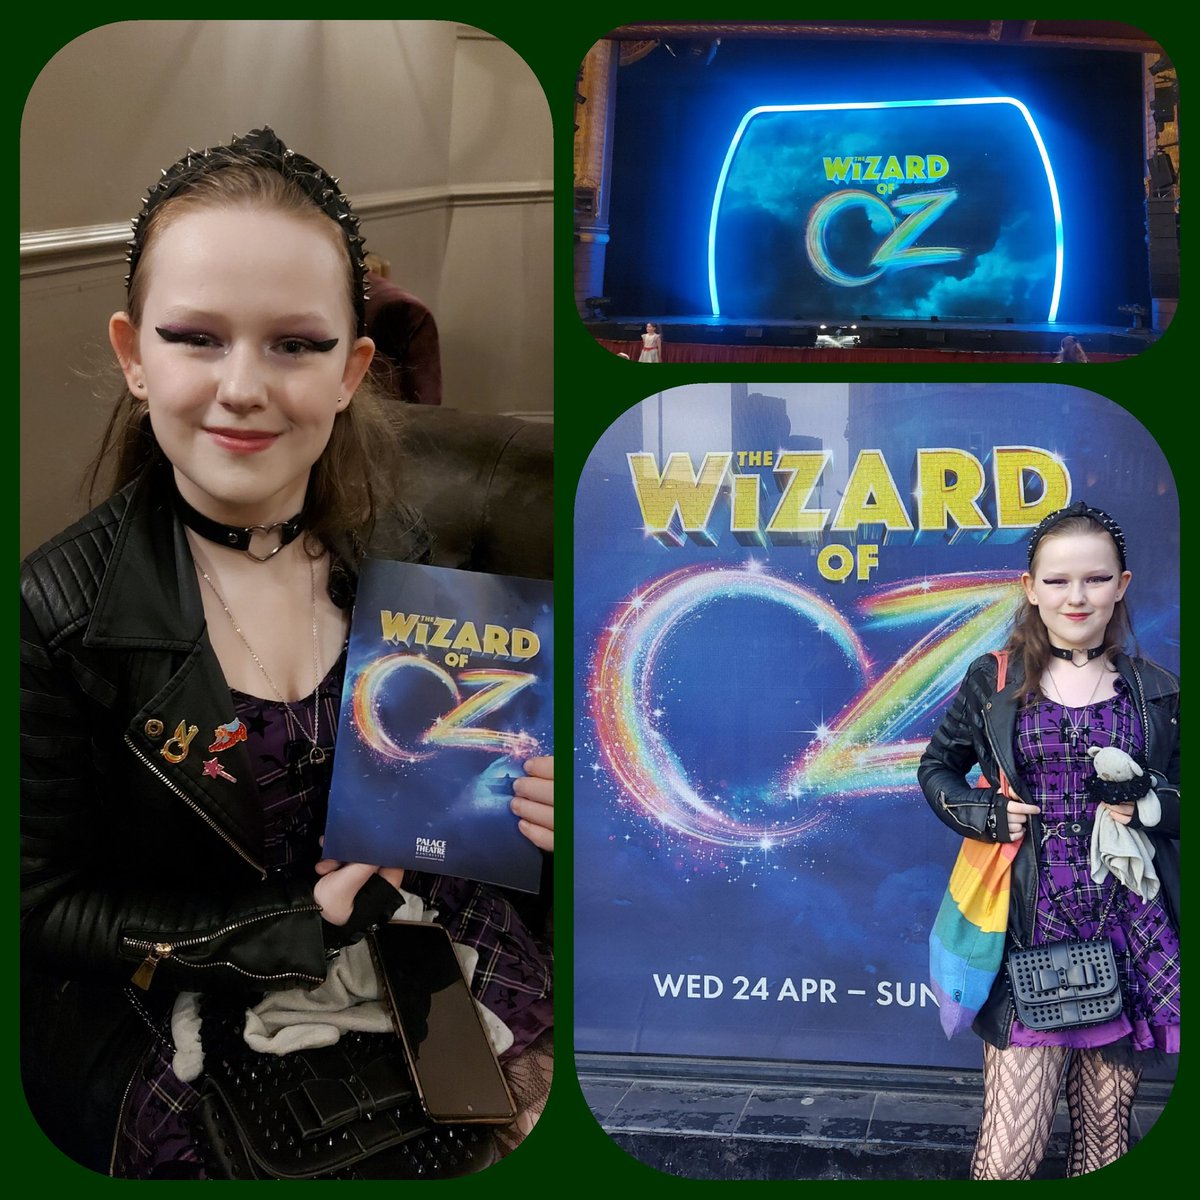 Tonight Ash is going Somewhere Over the Rainbow if she only has the Brain, the Heart and the Nerve 🌈👠
@yellowbrickroad

#AshleighAlexandra 
#wizardofoz 
#rootingforthewitch 
#whostealsadeadwomansshoes